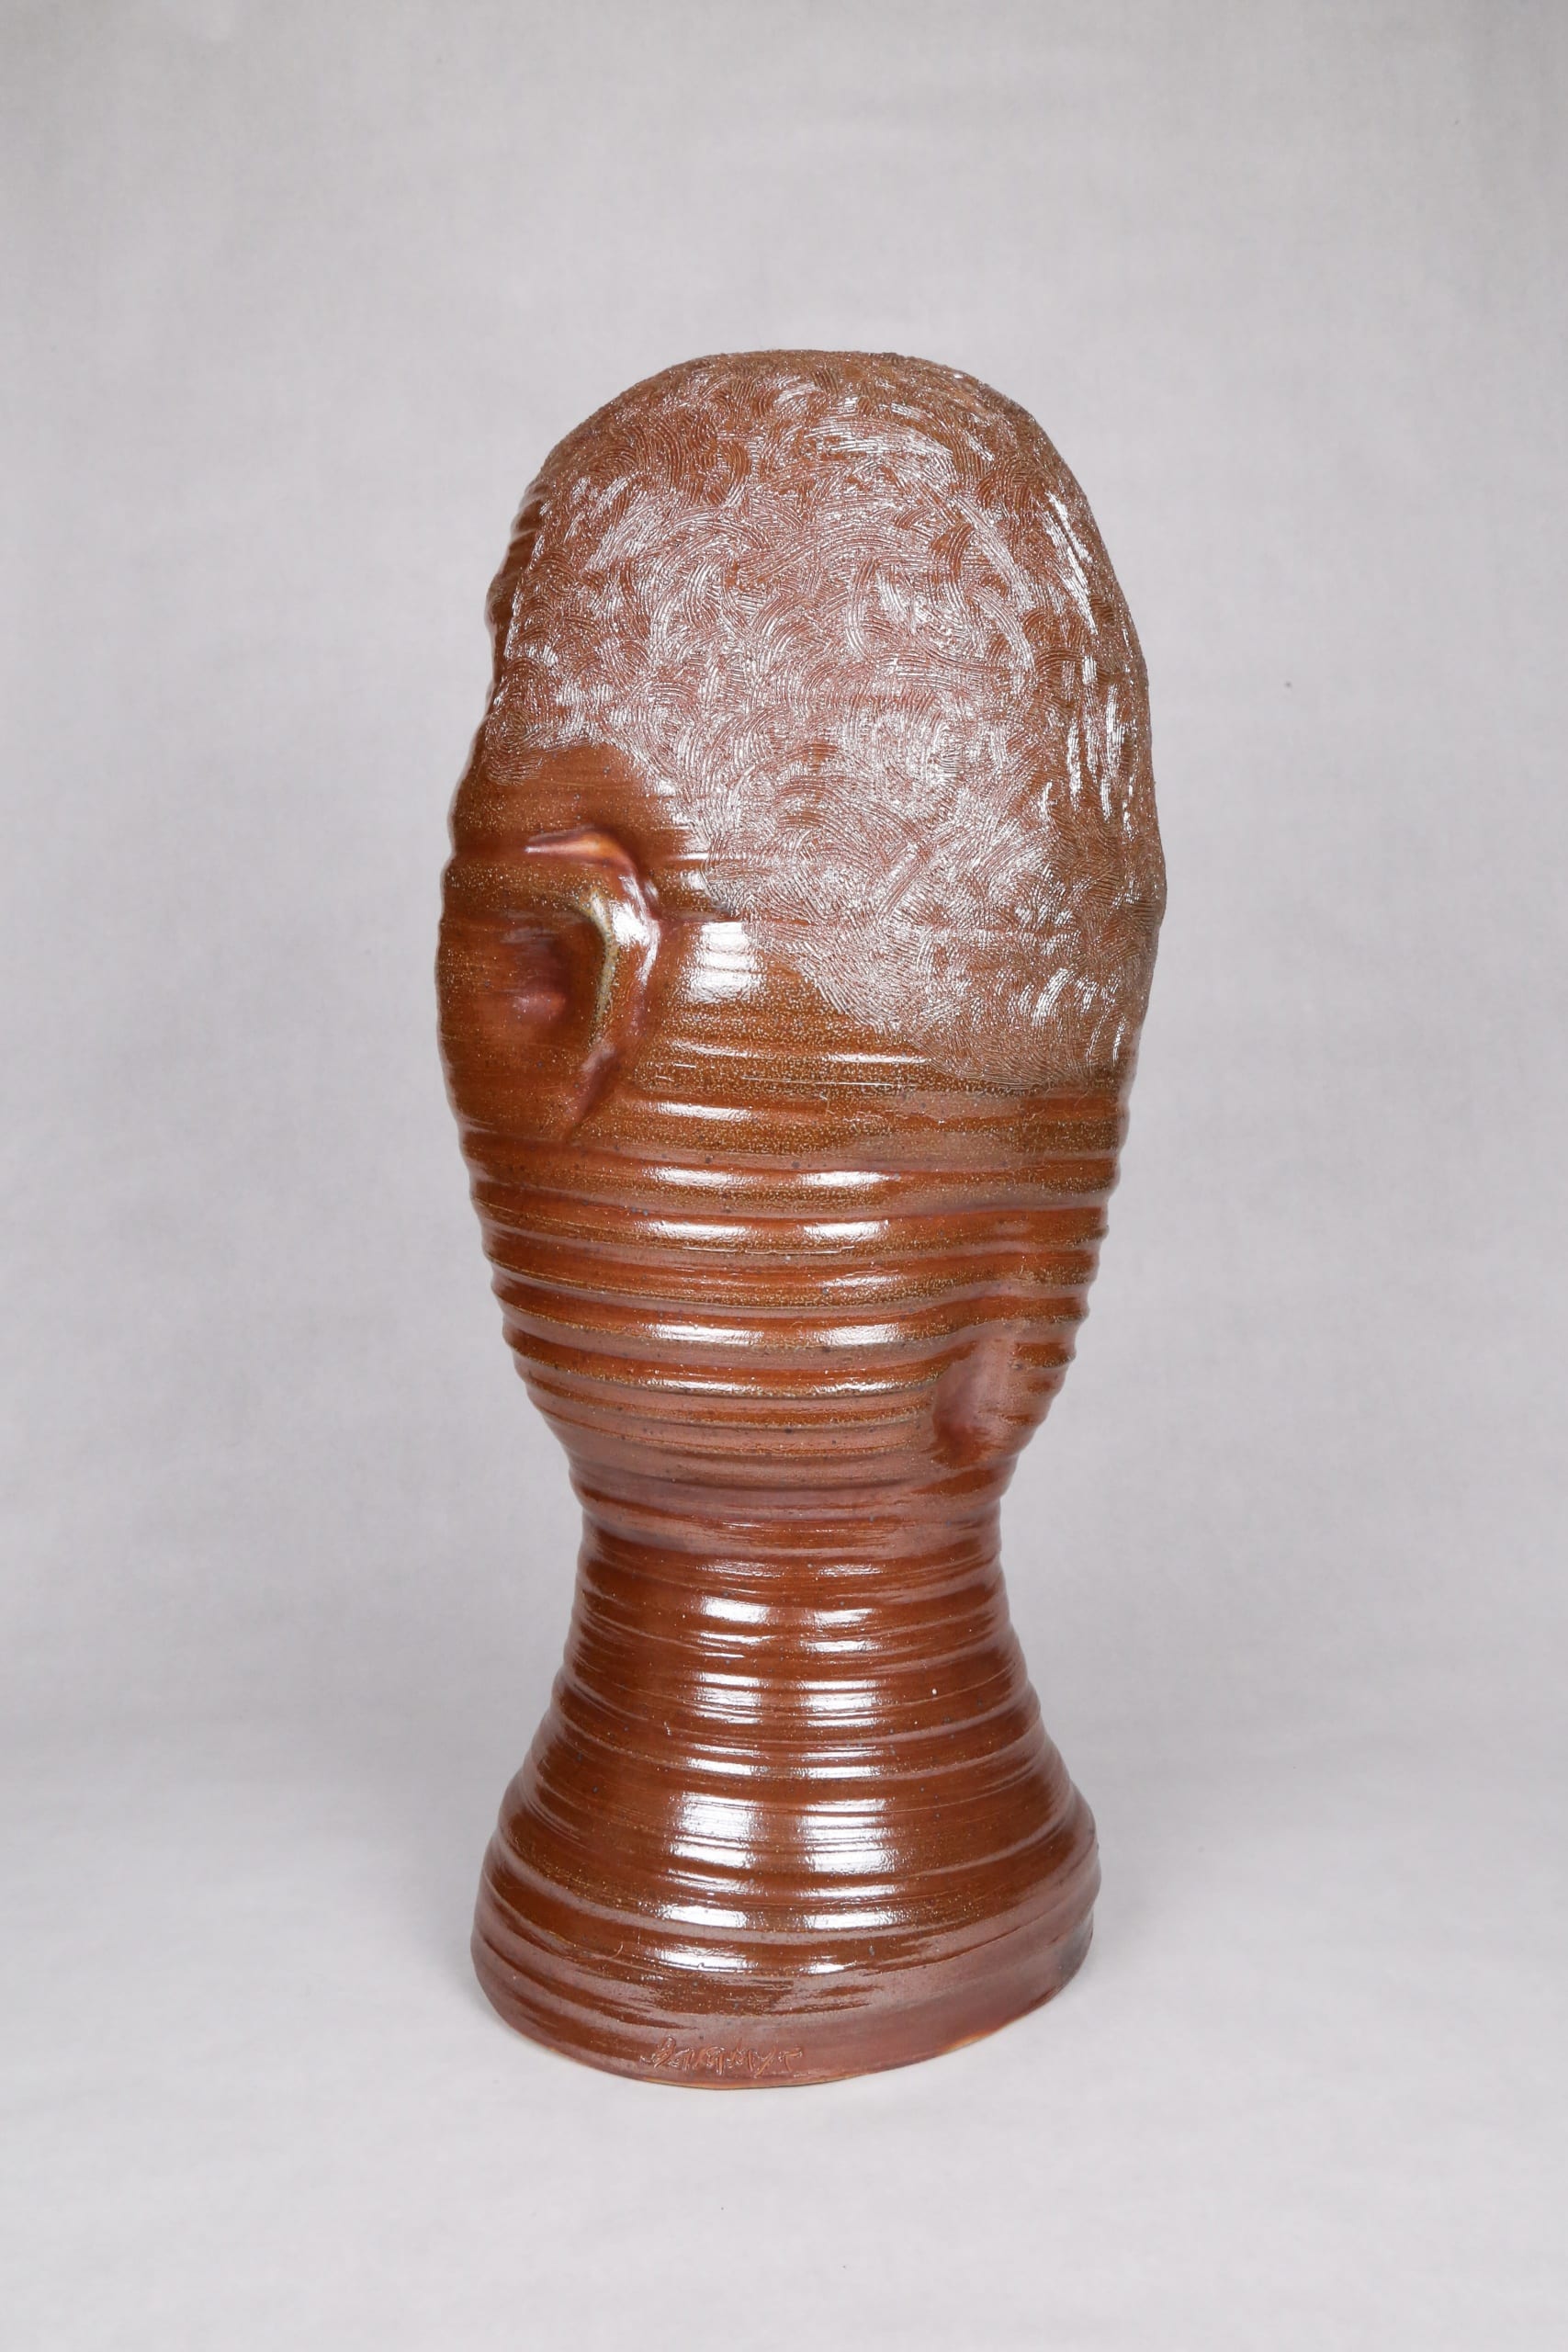 Color photograph with a back view of an abstract ceramic portrait head with distinctive ridges wrapping around the circumfrance of the head. The object is monochromatic (warm brown) with a light, luminescent glaze applied to its surface. It appears as though it was made on a spinning potter‘s wheel.